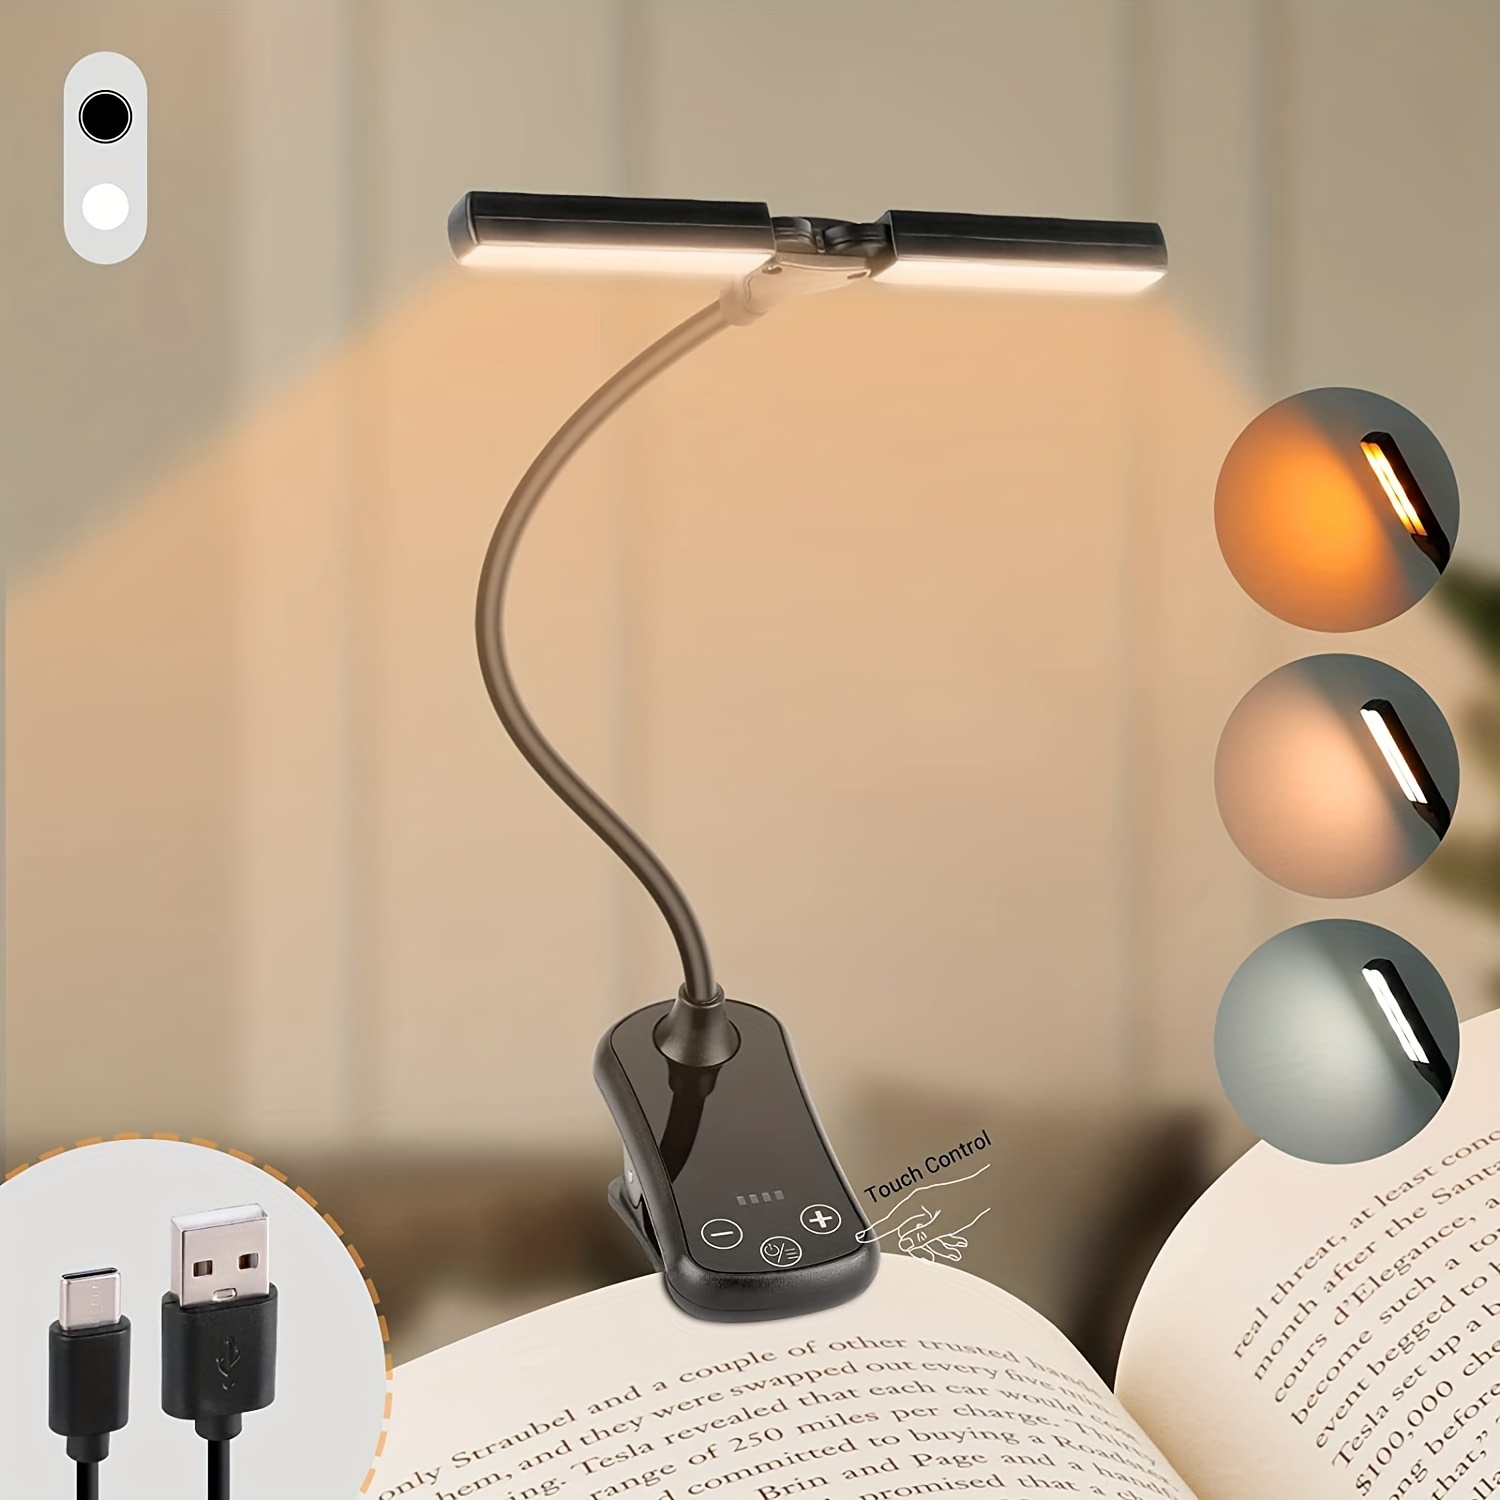 Gritin 9 LED Rechargeable Book Light for Reading in Bed - Eye Caring 3  Color Temperatures,Stepless Dimming Brightness,80 Hrs Runtime Small  Lightweight Clip On Book Reading Light for Kids,Studying 